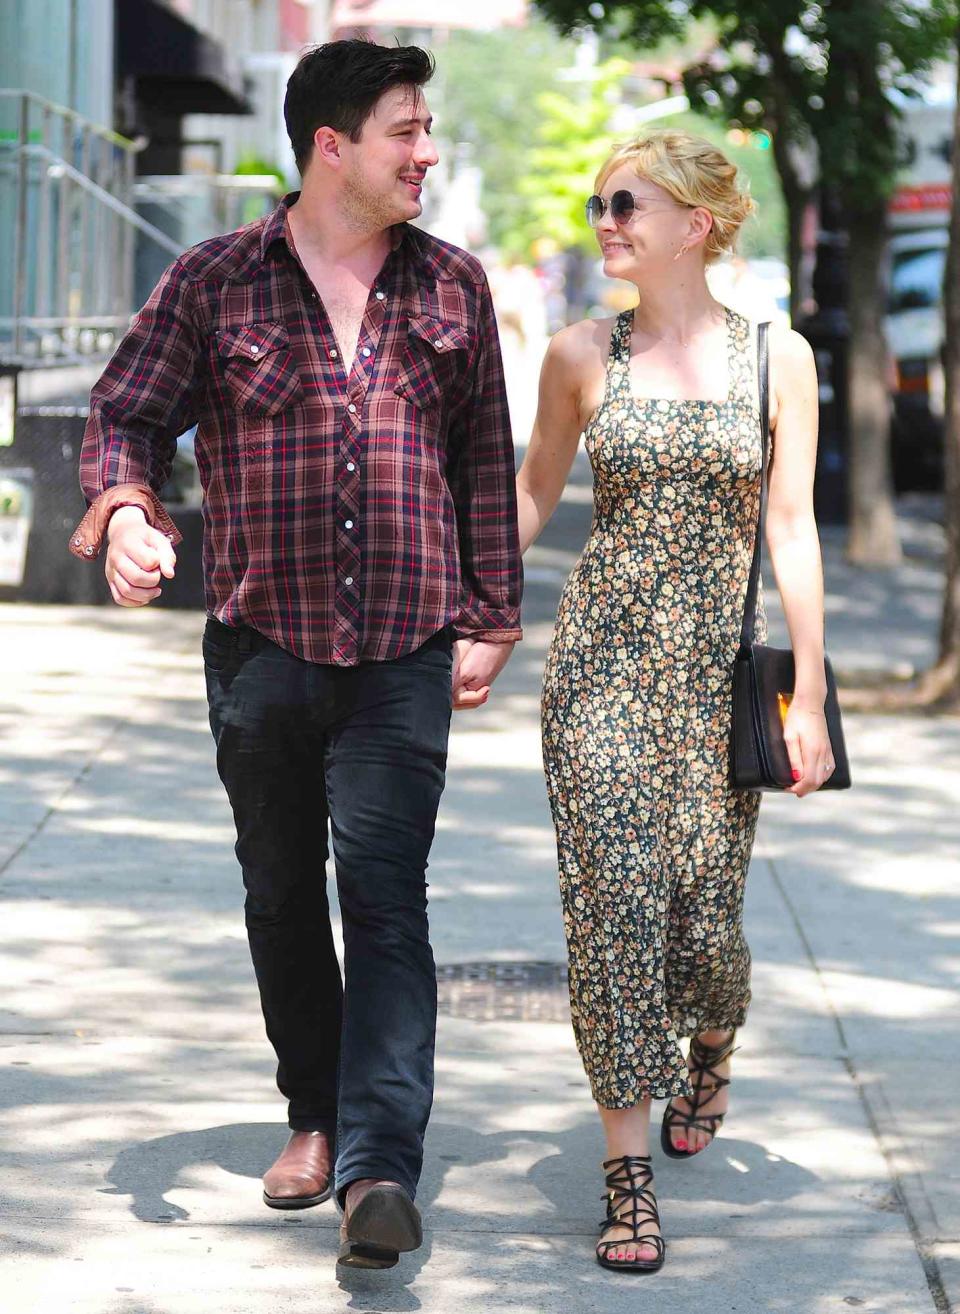 Marcus Mumford and Carey Mulligan are seen in SoHo on August 2, 2012 in New York City